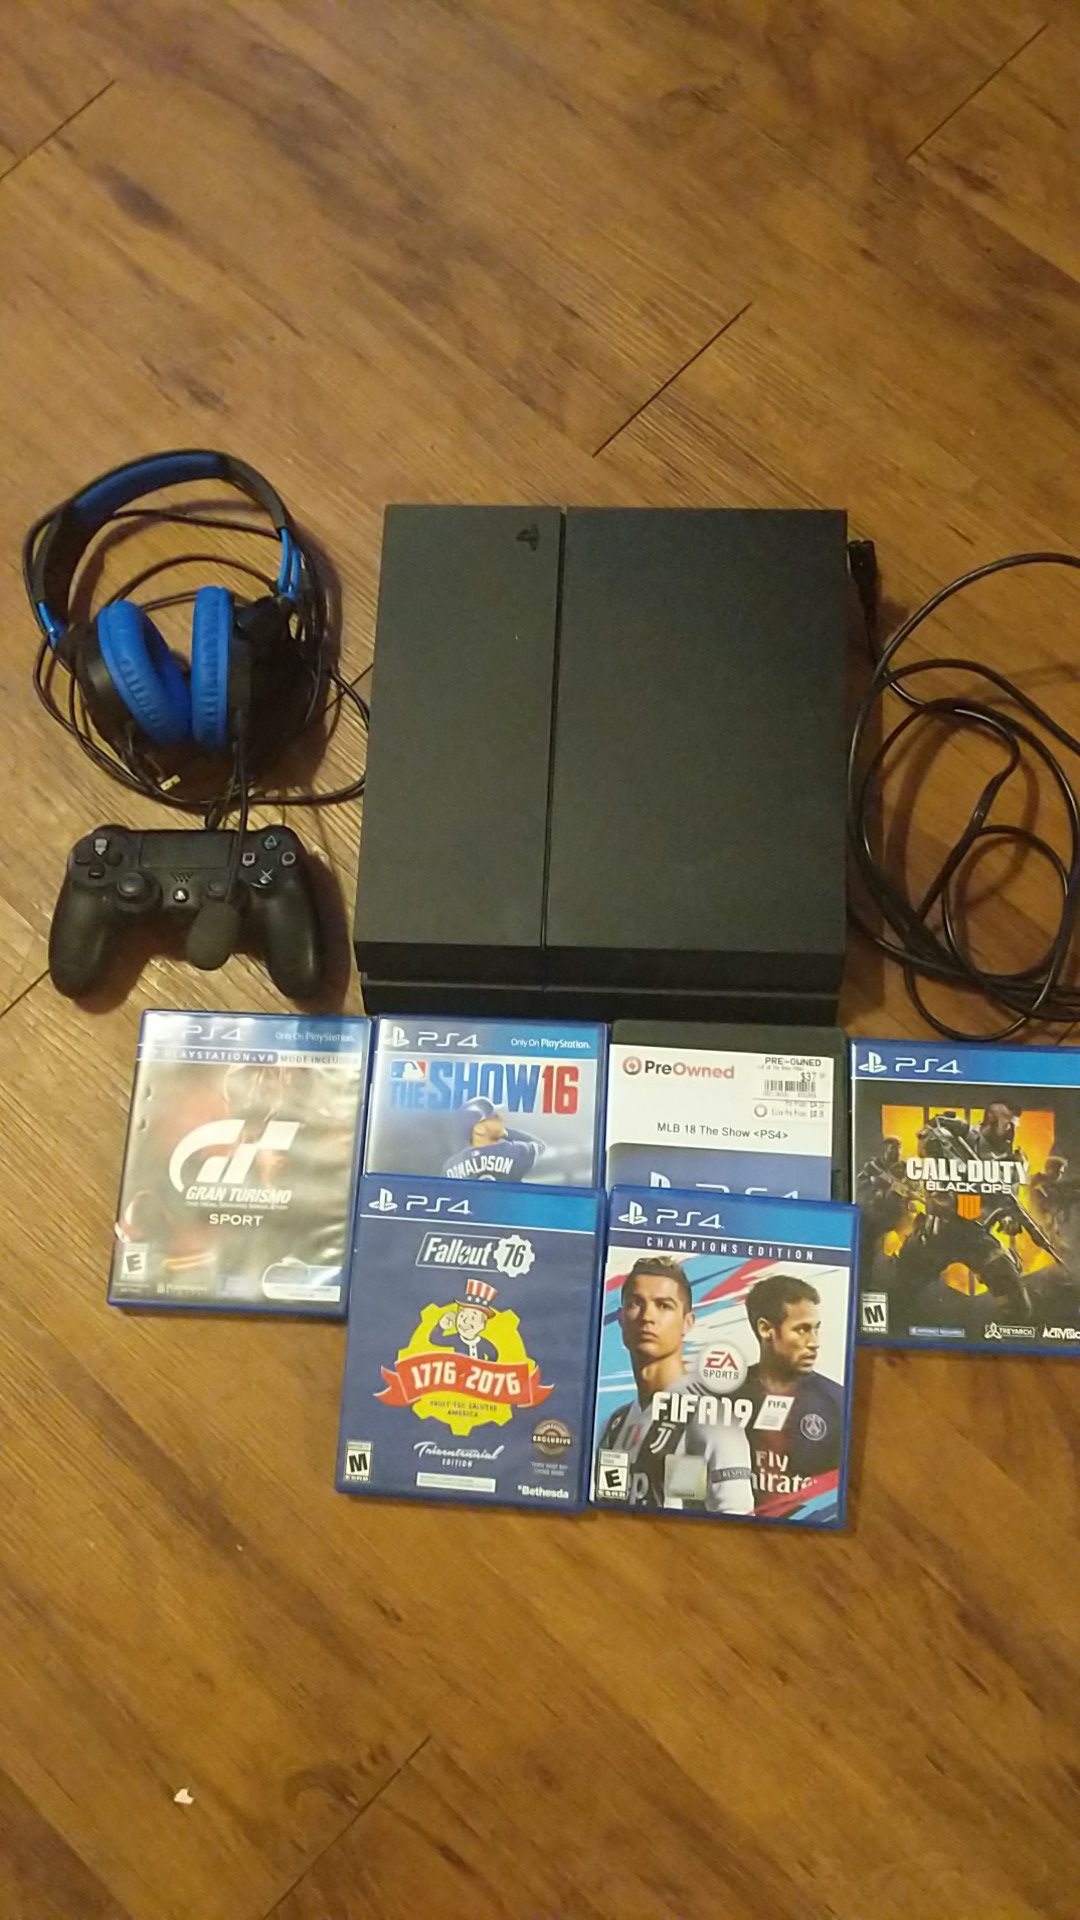 PS4, 6 games, controller, headset, and cords